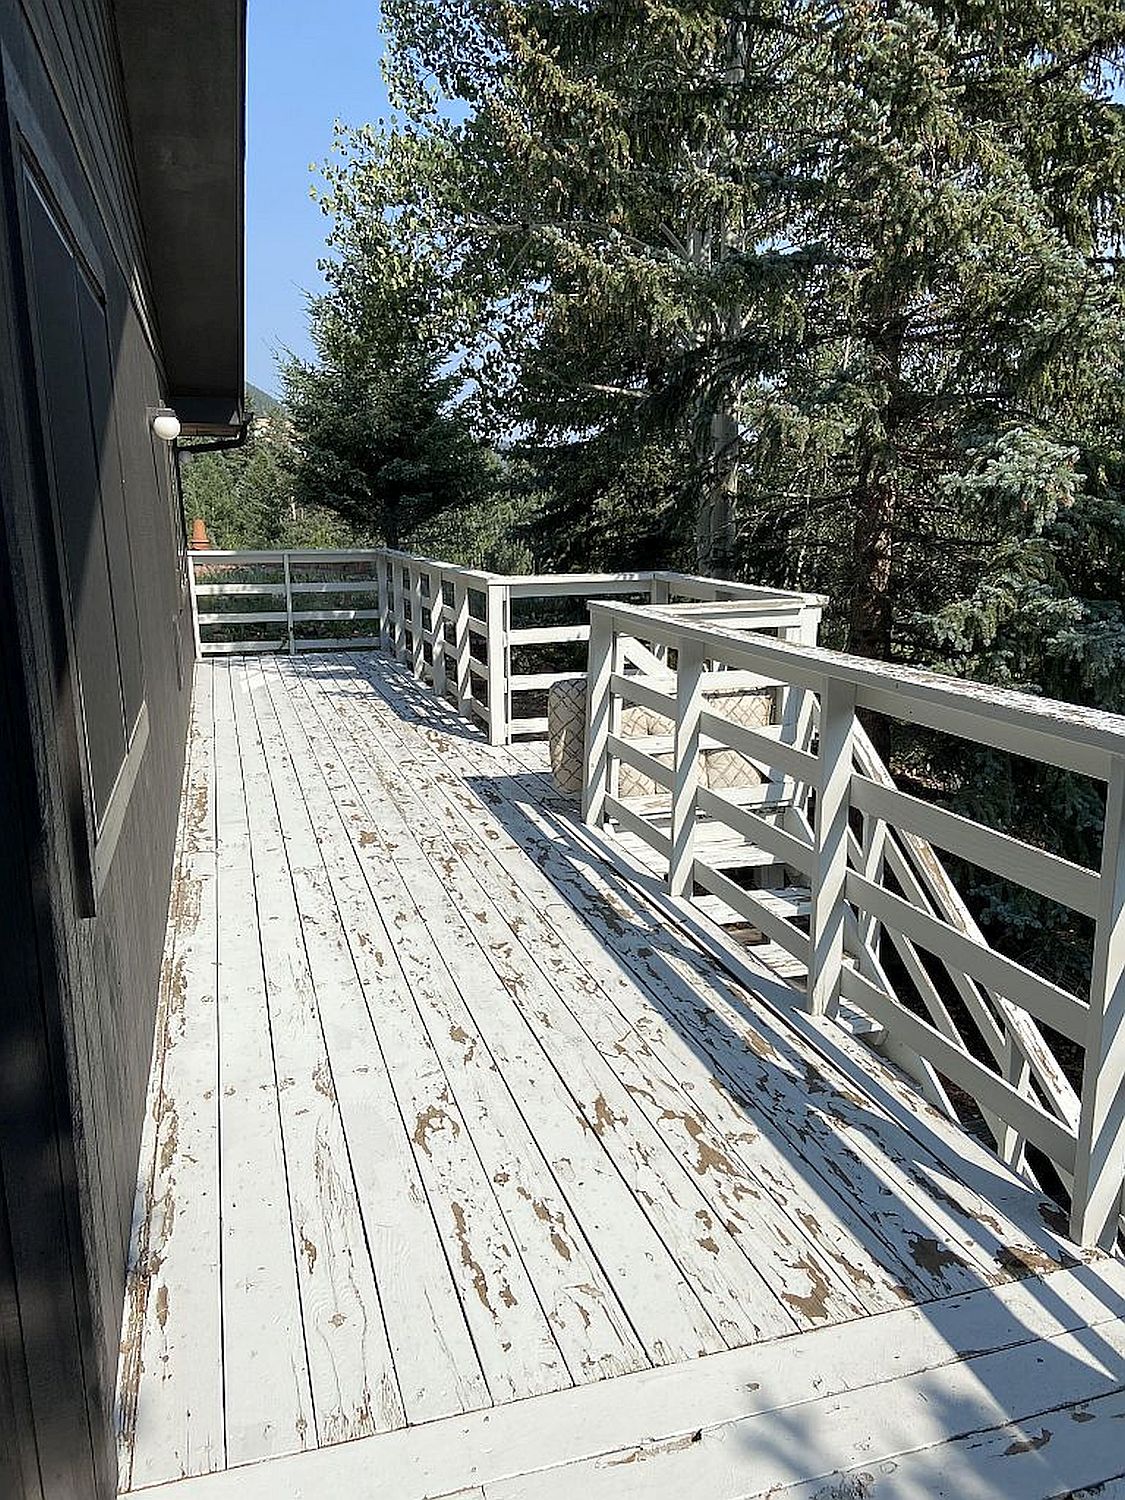 The original, dated redwood deck that was removed